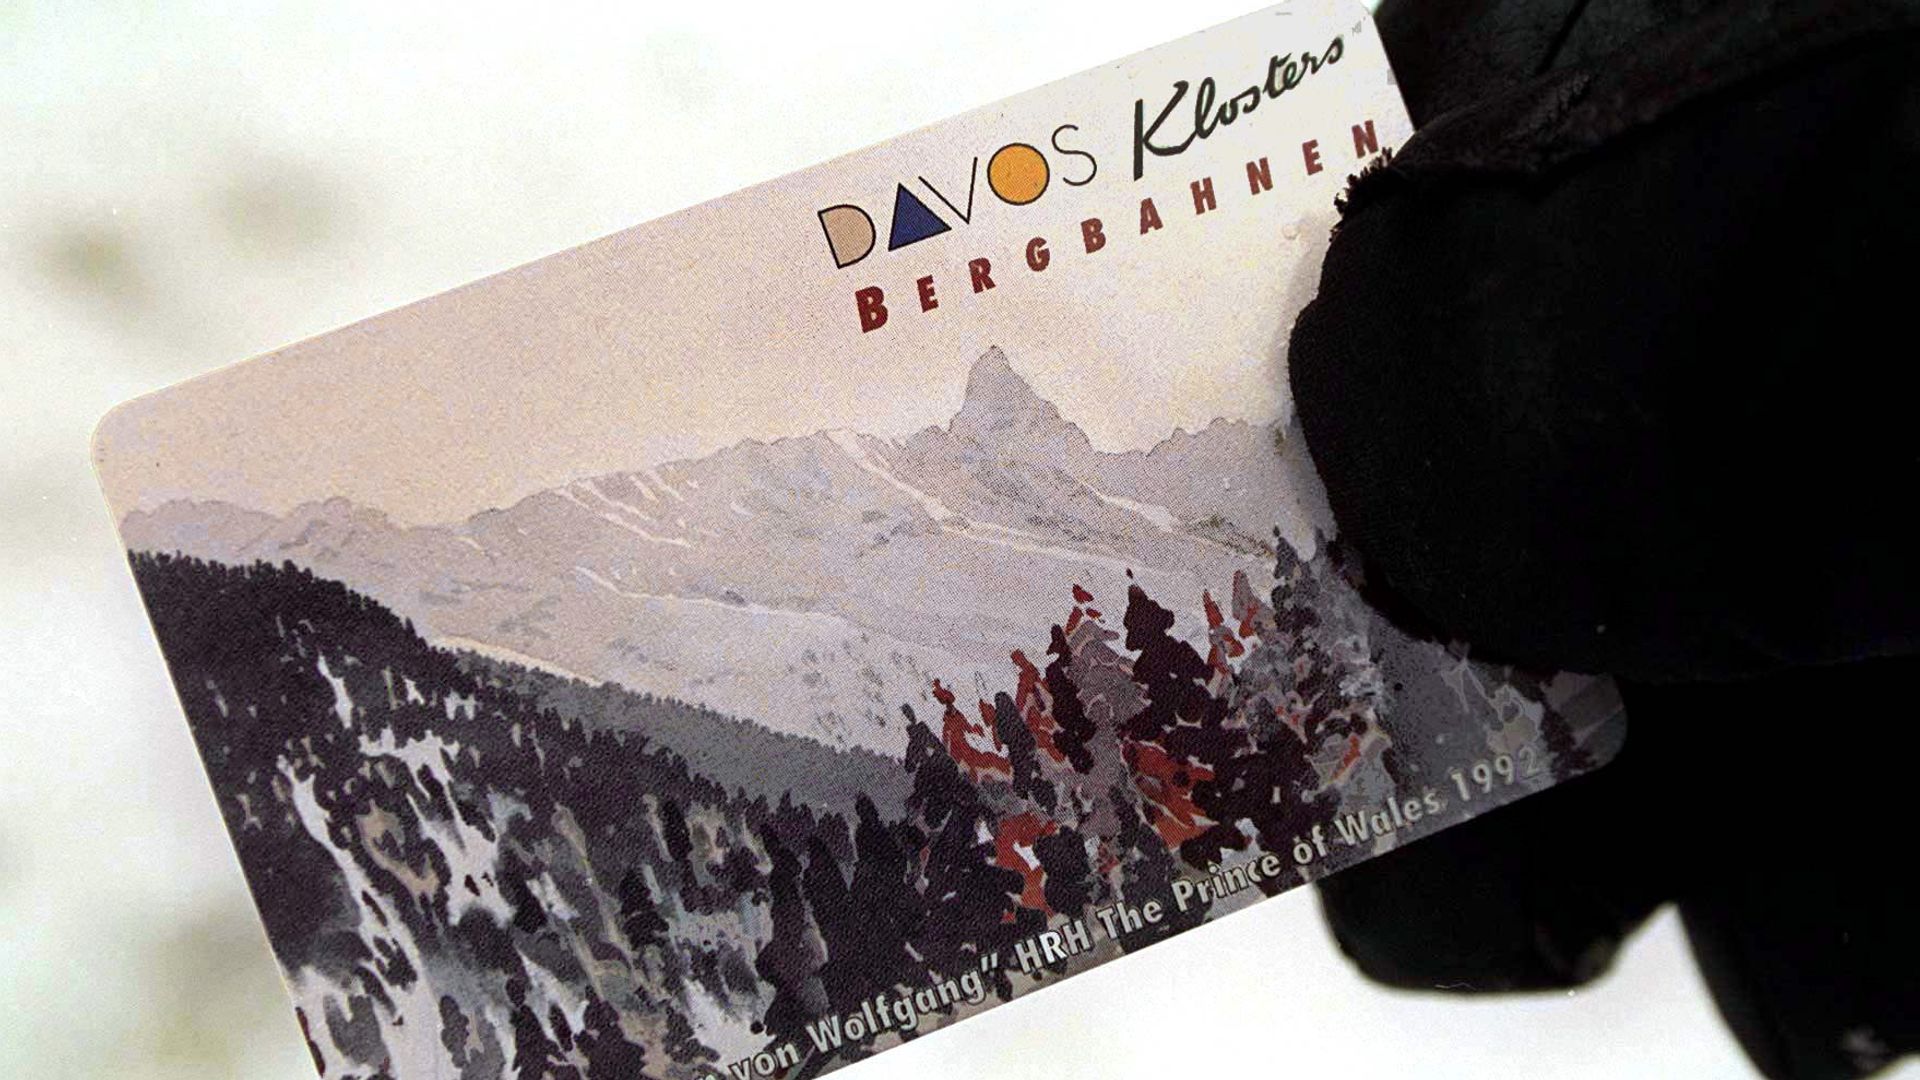 A ski pass featuring a watercolour painting of mountains and trees by King Charles